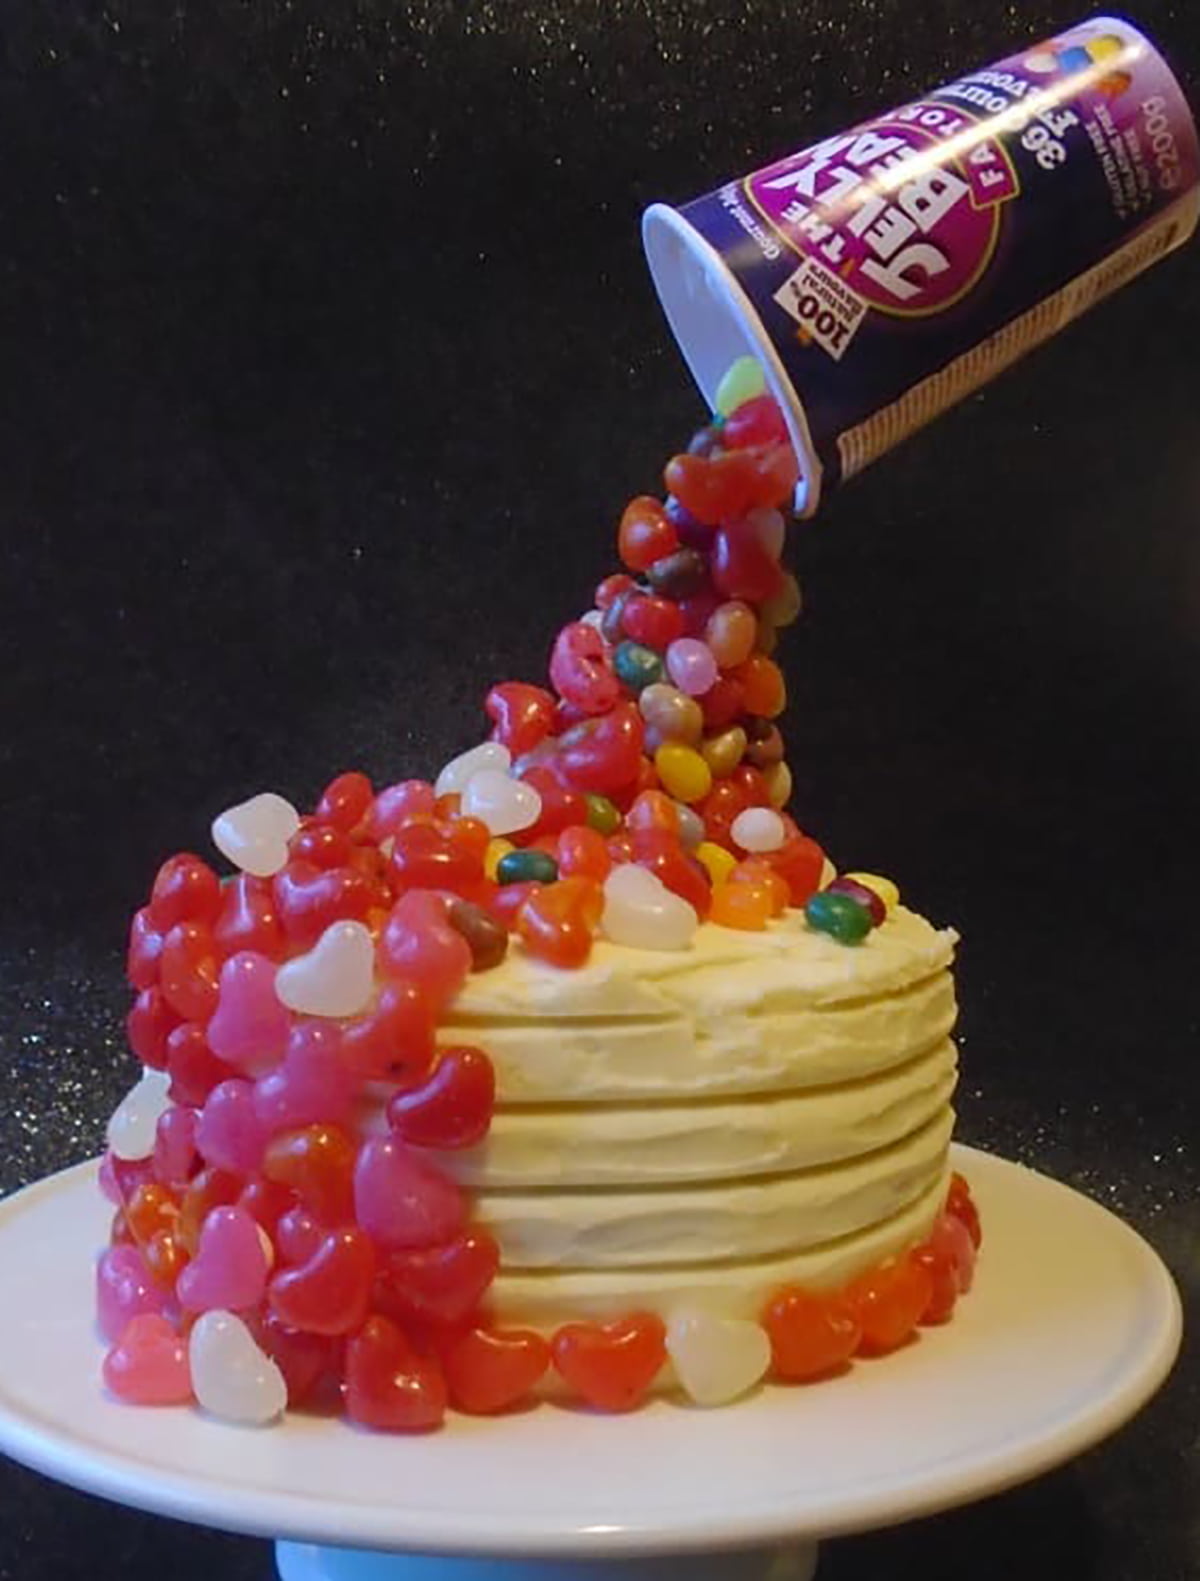 jelly beans appearing to spill onto a cake. 